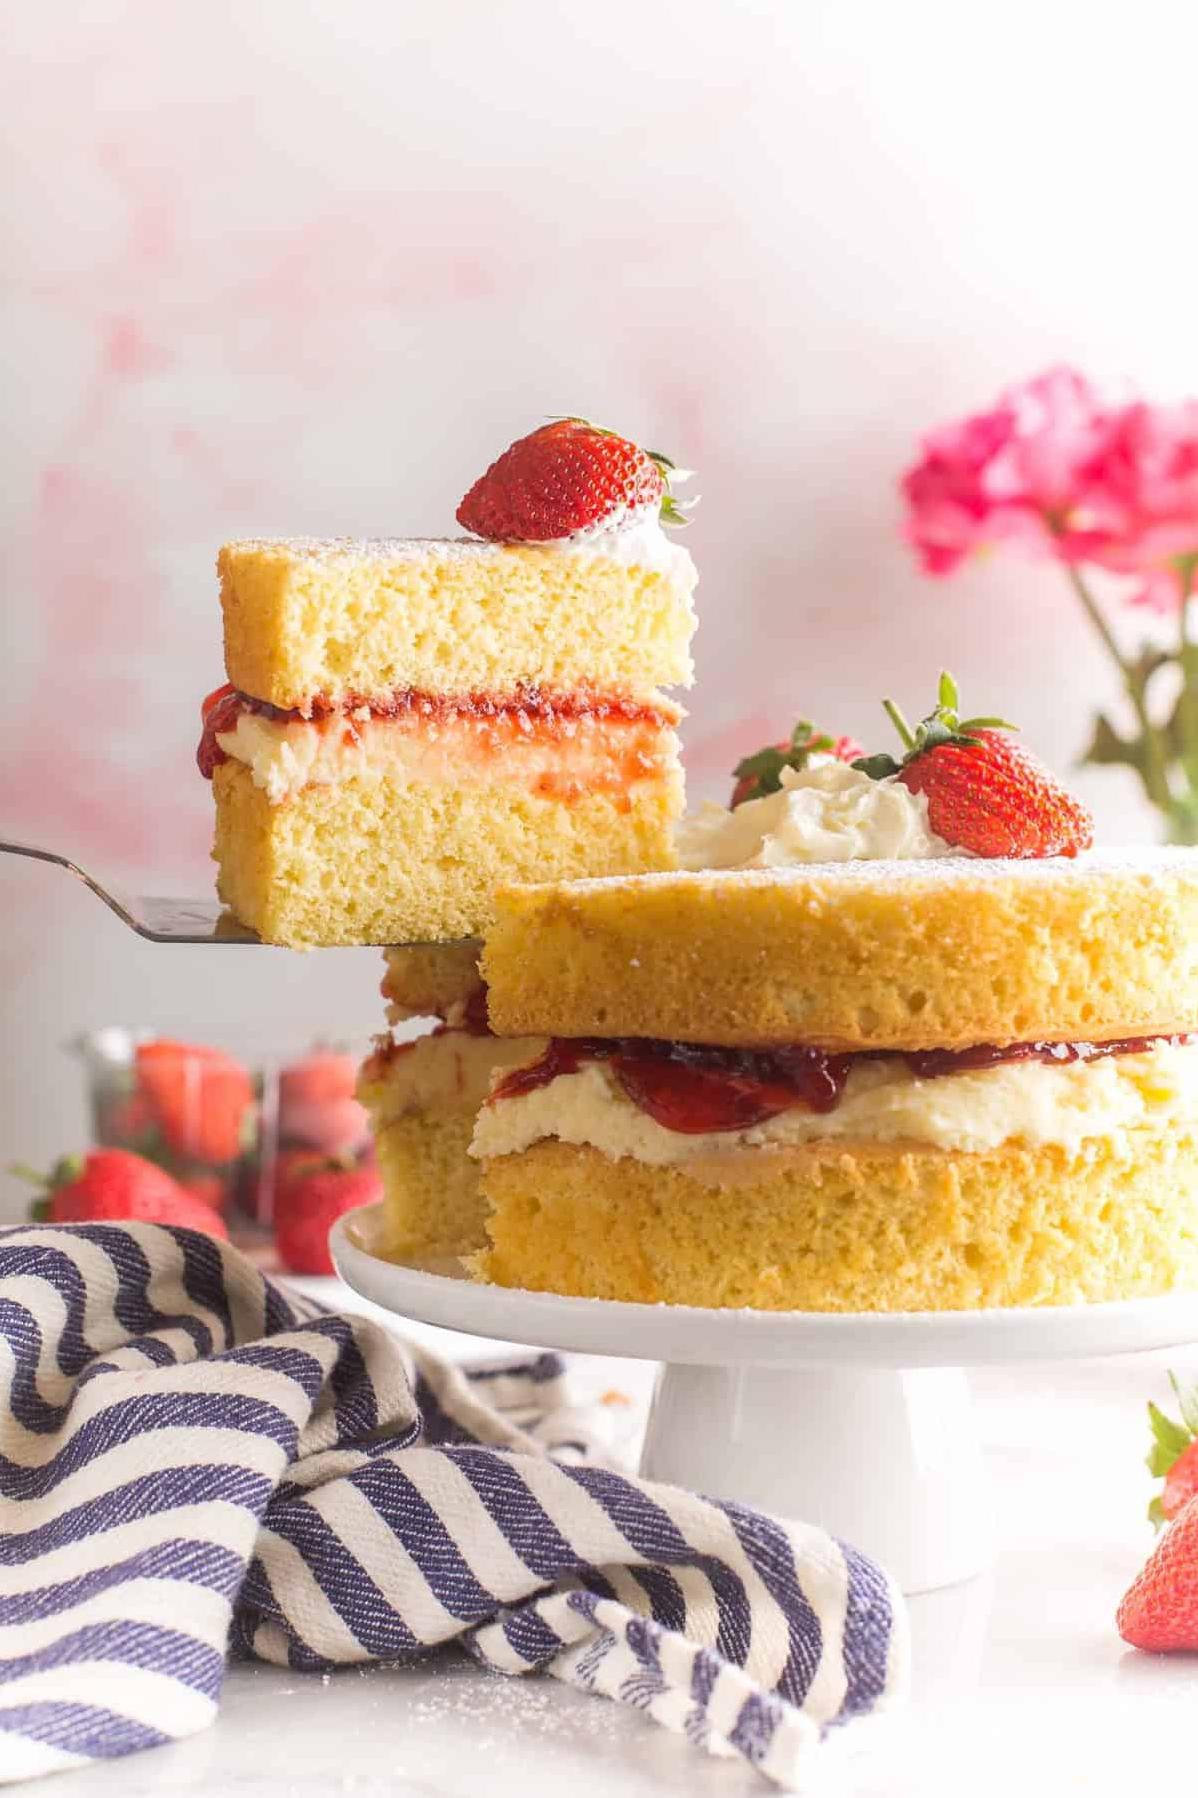  Don't be fooled by its delicate appearance, this cake is packed full of flavour that will surprise your taste buds!